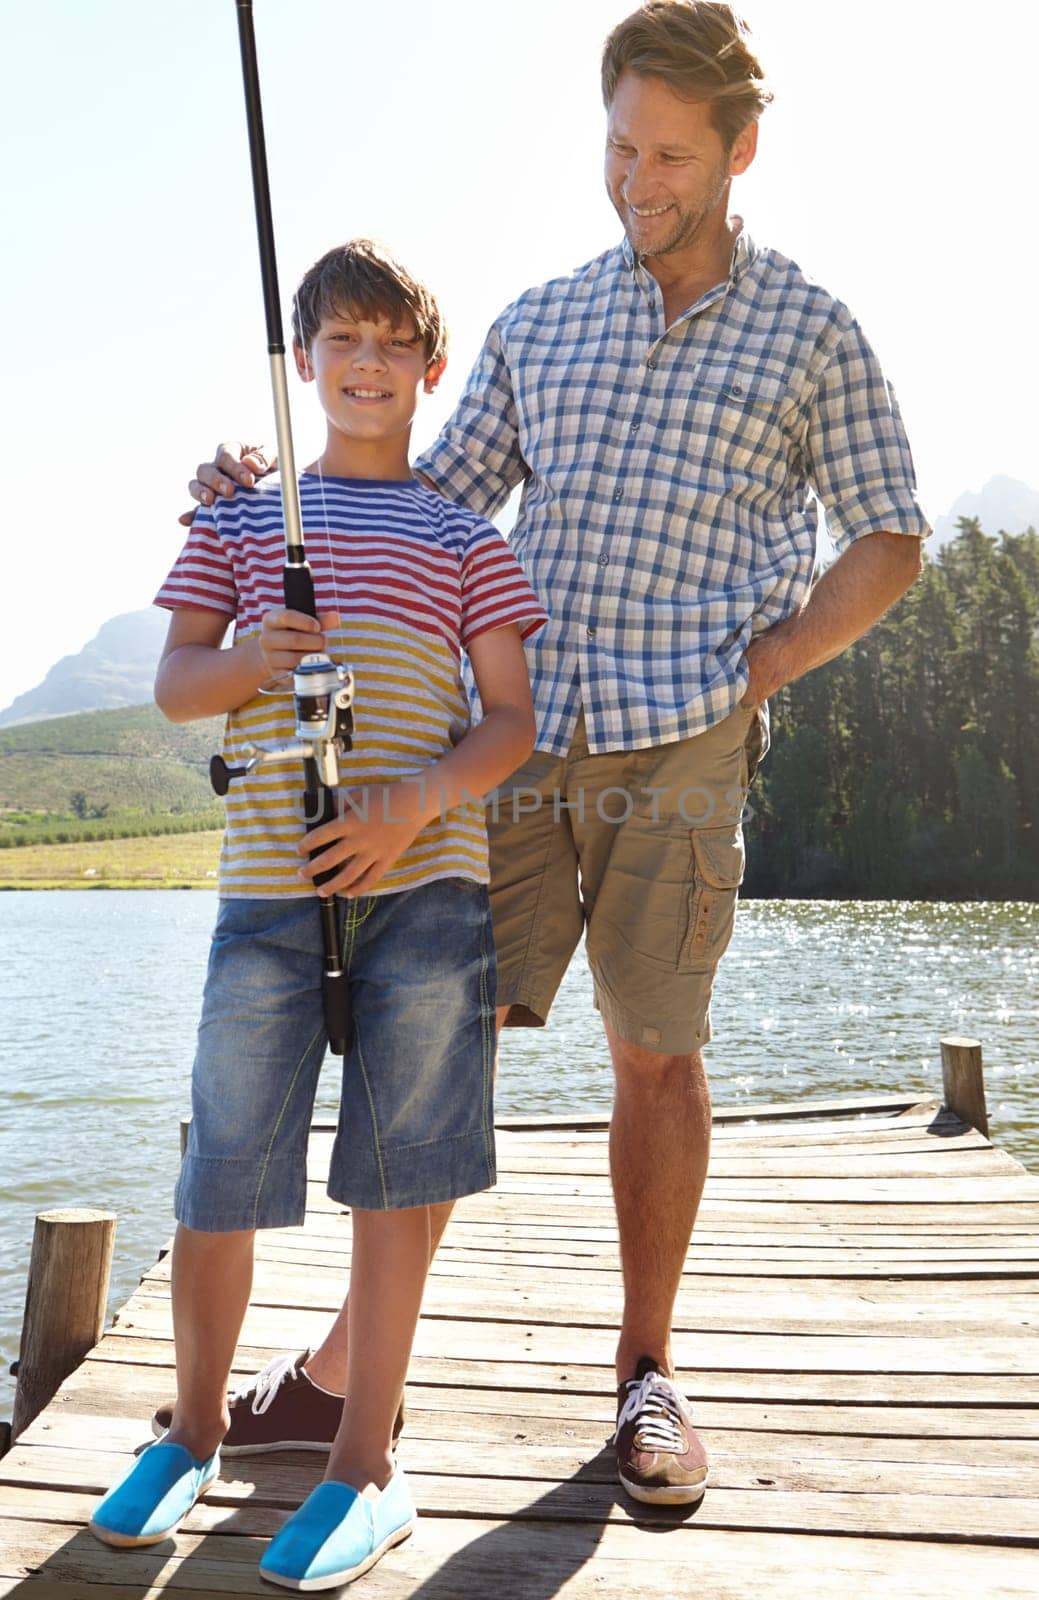 Fishing, lake or pole by father and son in nature bonding, vacation or travel adventure outdoor. Family, love and kid with dad at a river for learning, teaching or sustainable living while camping.